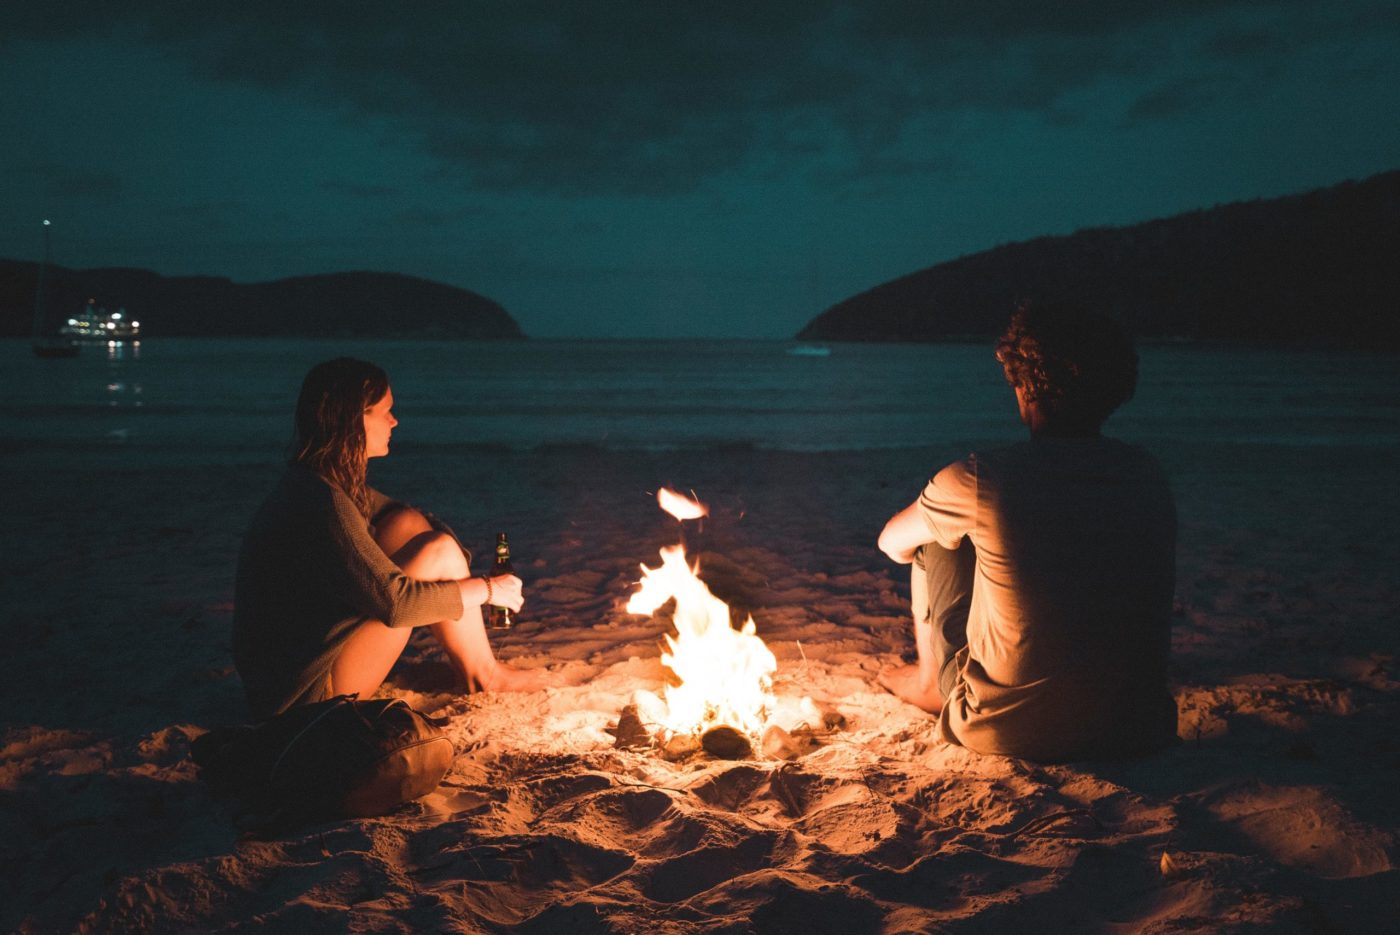 A man and a woman make a bonfire on the beach at night